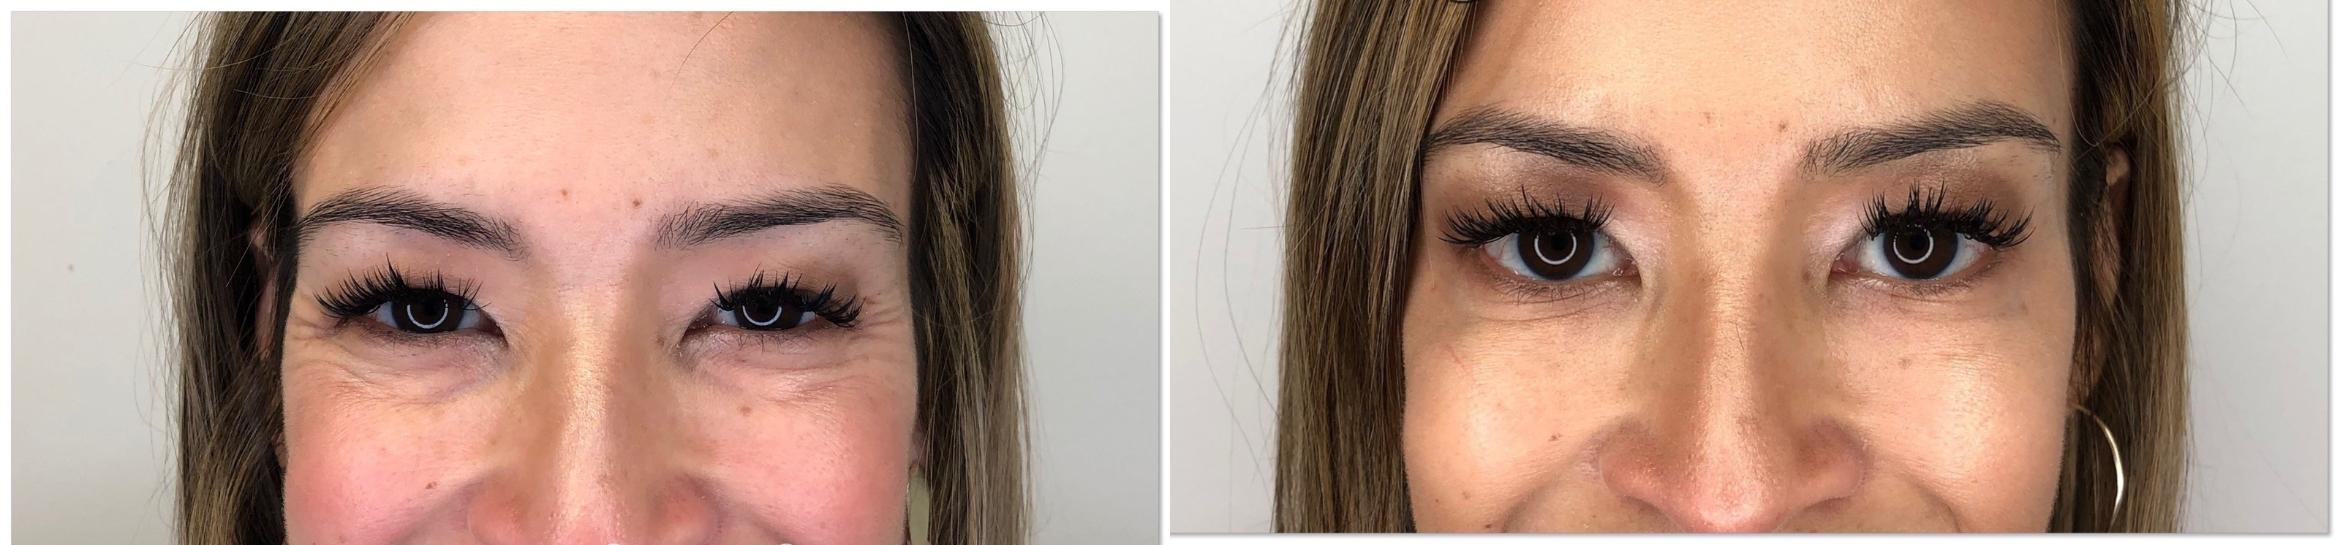 Close-up of woman's eyes before and after BOTOX treatment showing much younger-looking eyes in the after photo.